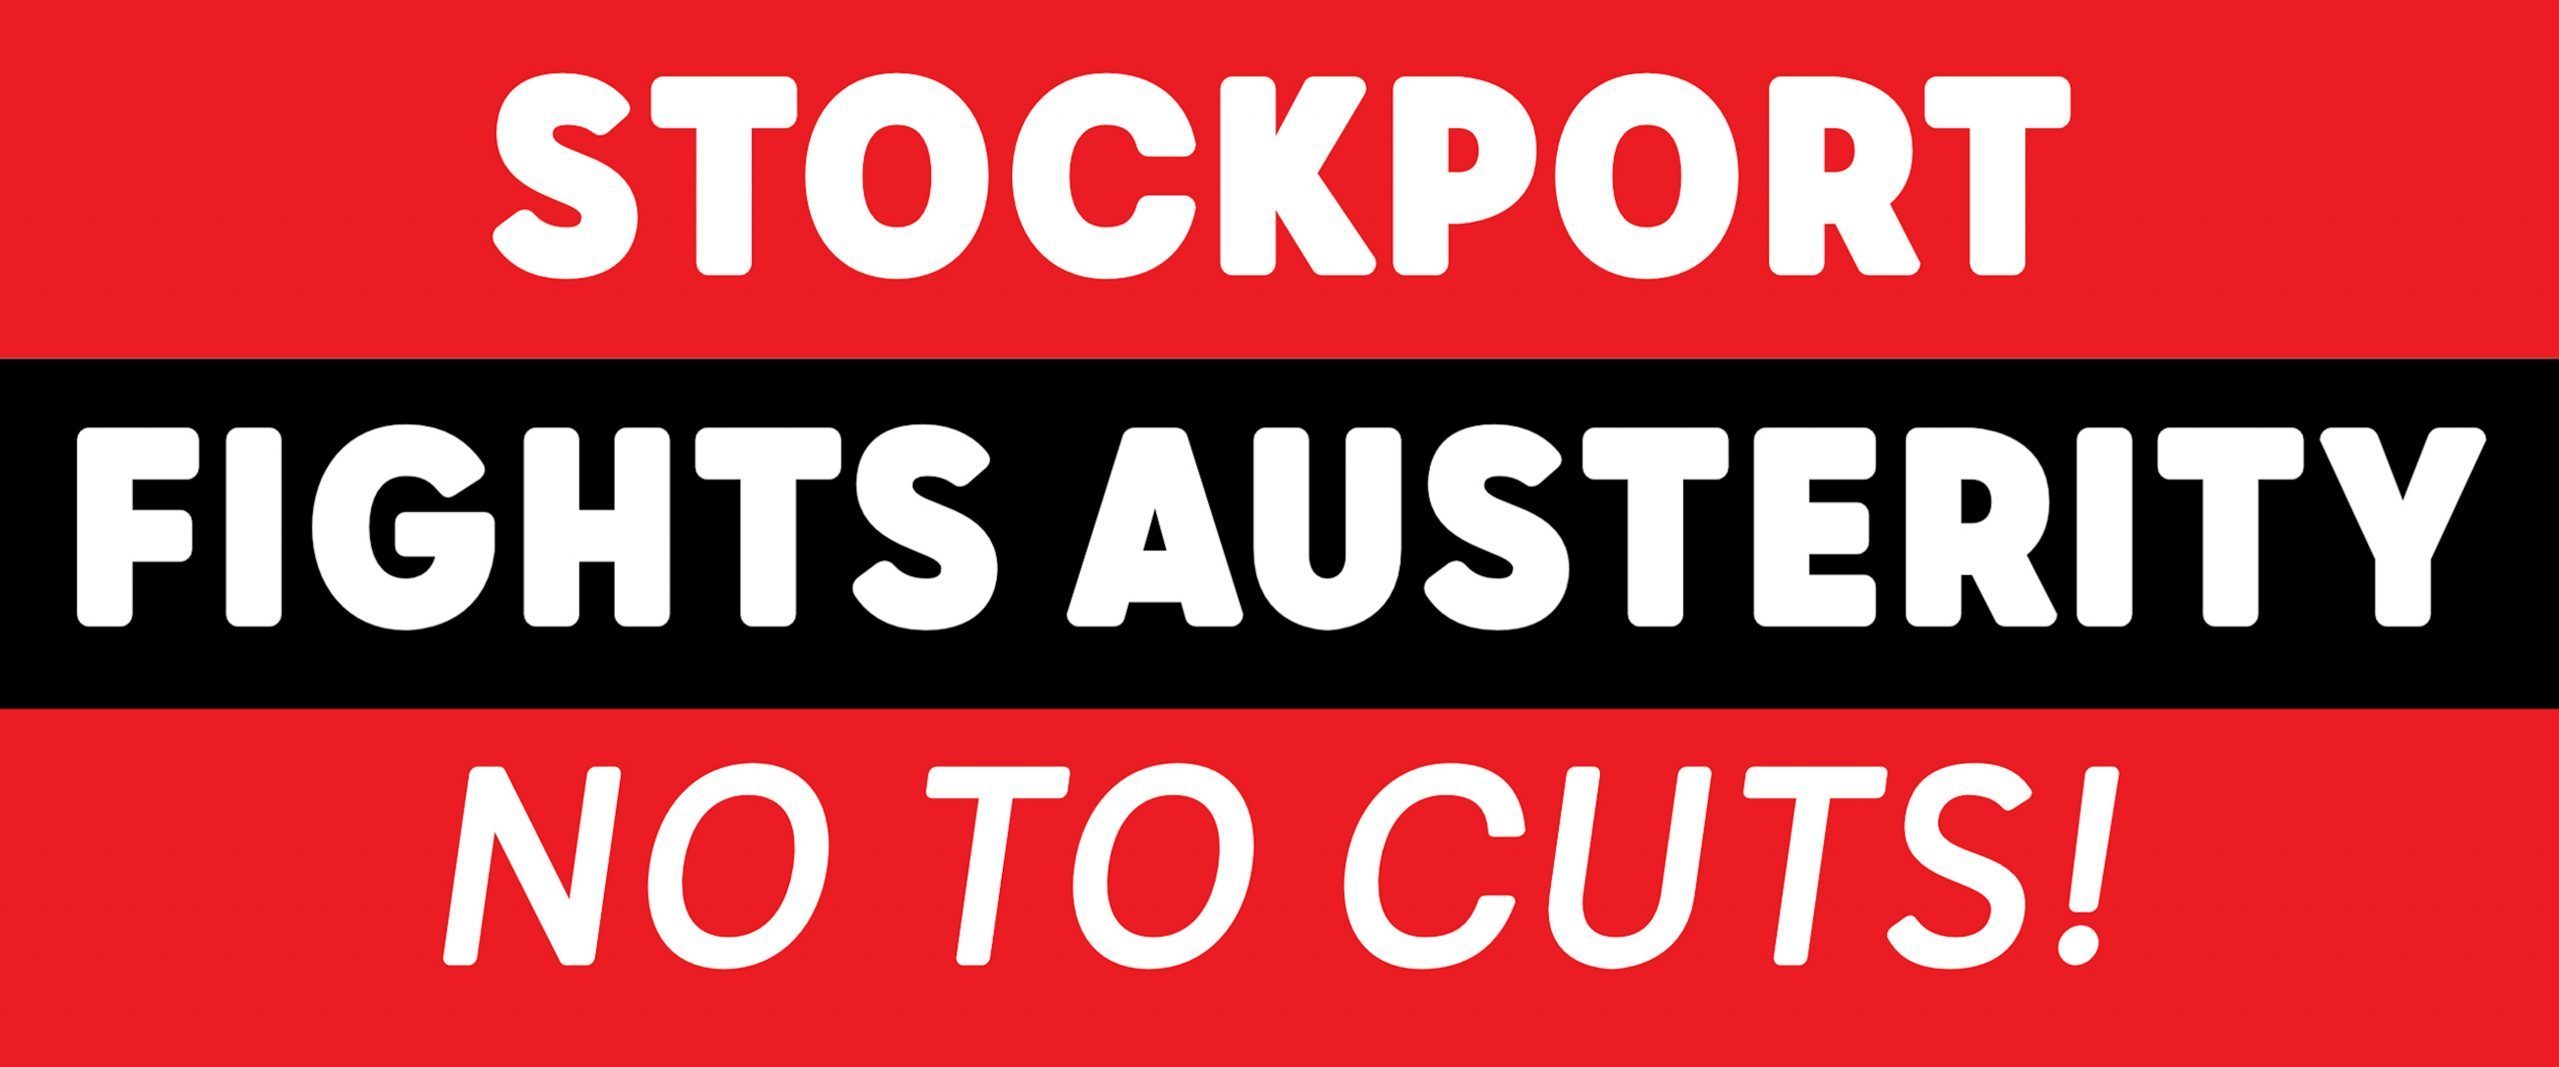 Stockport Fights Austerity No to cuts!